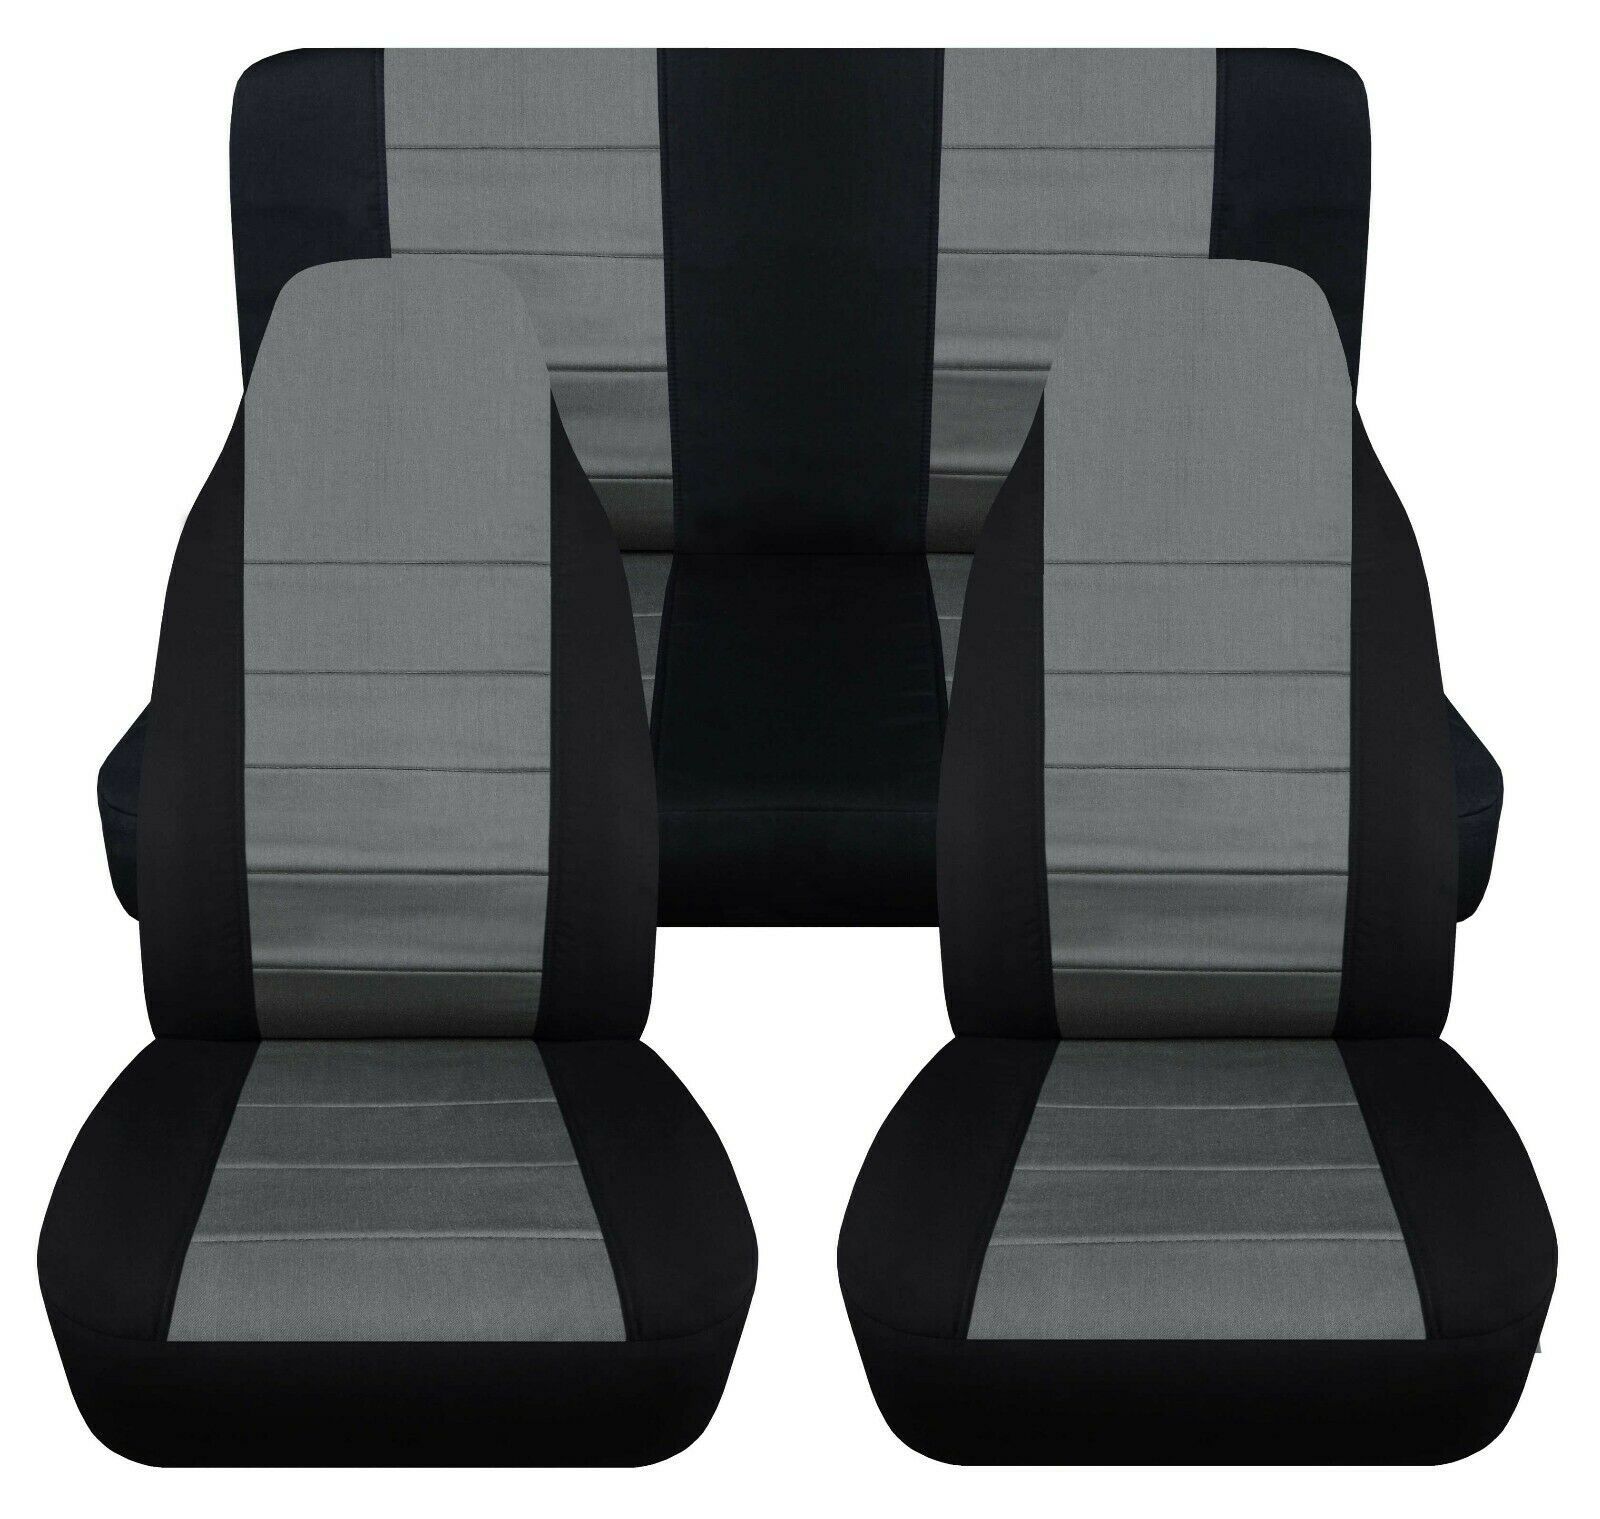 Front and Rear car seat covers Fits Jeep wrangler YJ-TJ-LJ 85-06 Black-Charcoal